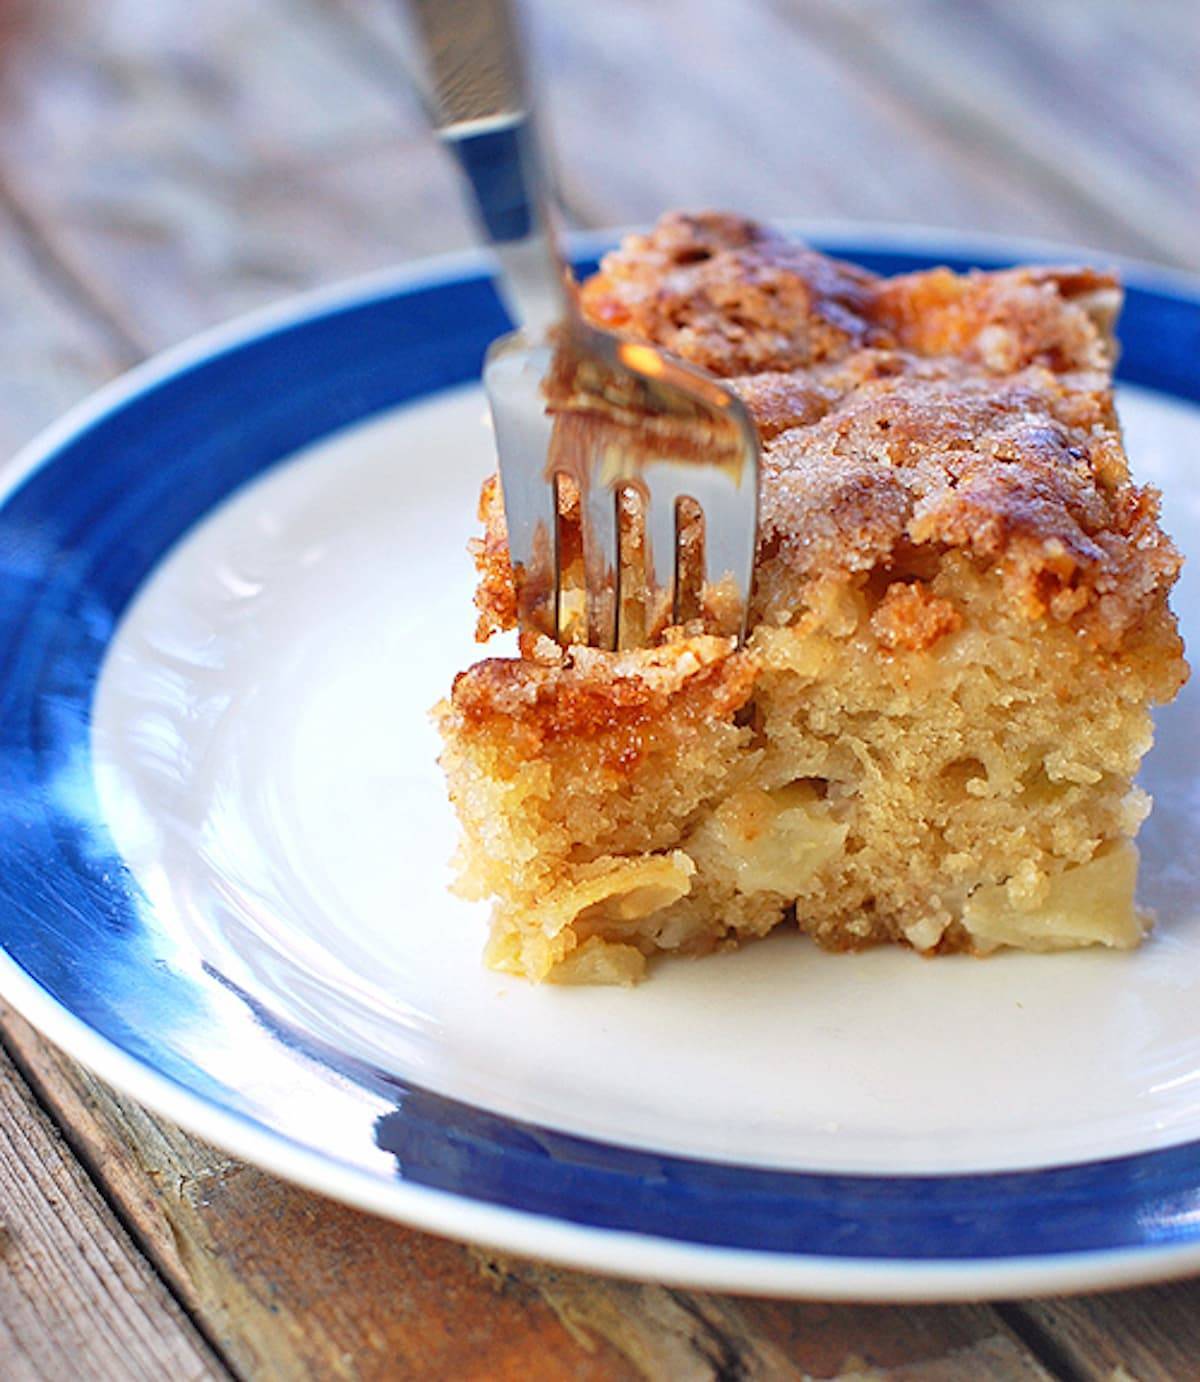 Cinnamon Sugar Apple Cake on a blue and white plate with a fork.